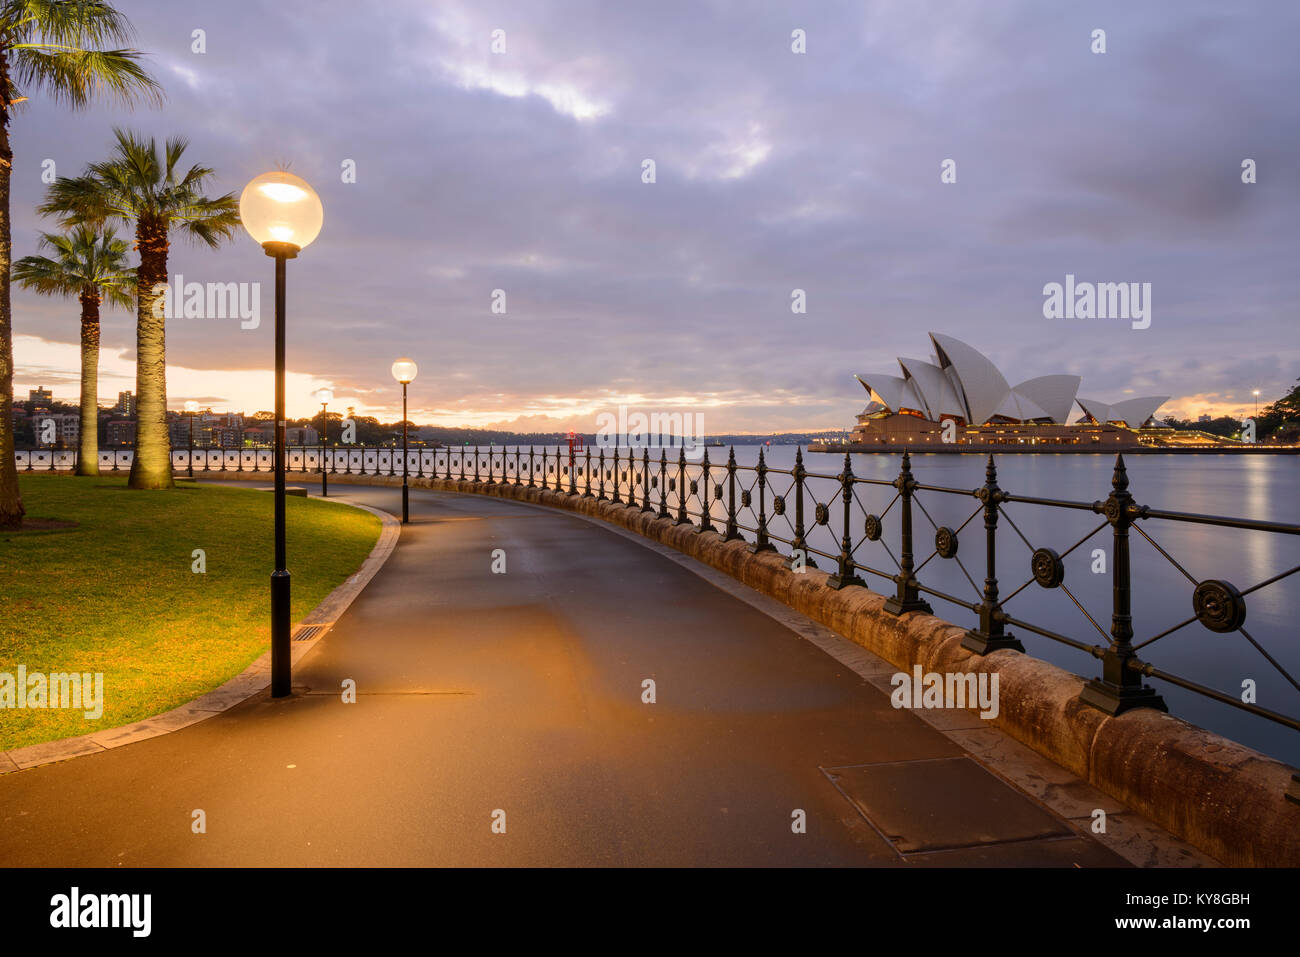 Image of the Sydney Opera House in Sydney, NSW, Australia from the boardwalk in front of Park Hyatt Sydney near Campbell's Cove Jetty at sunrise. Stock Photo